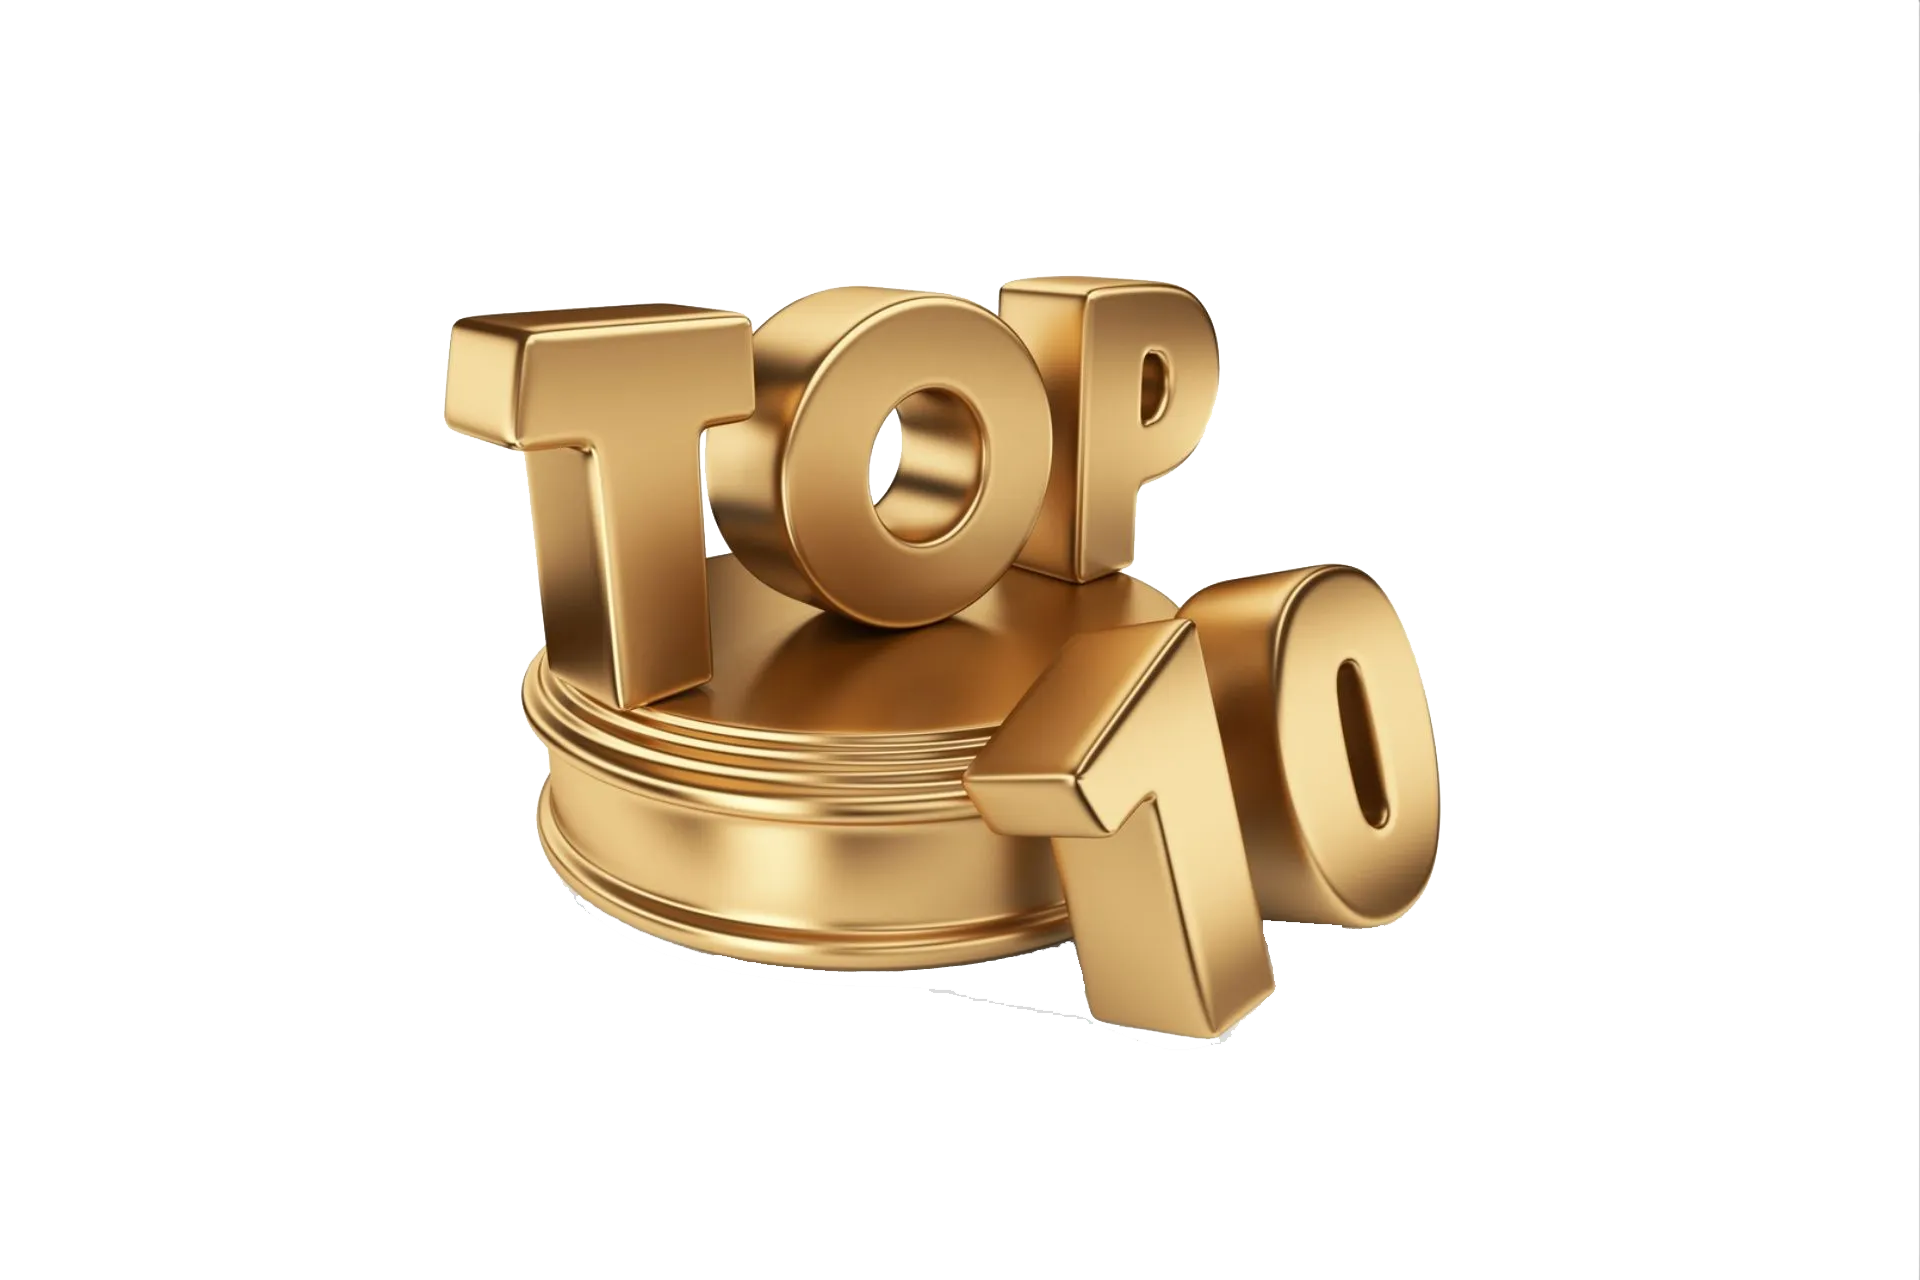 Top 10 News Stories for OBA News